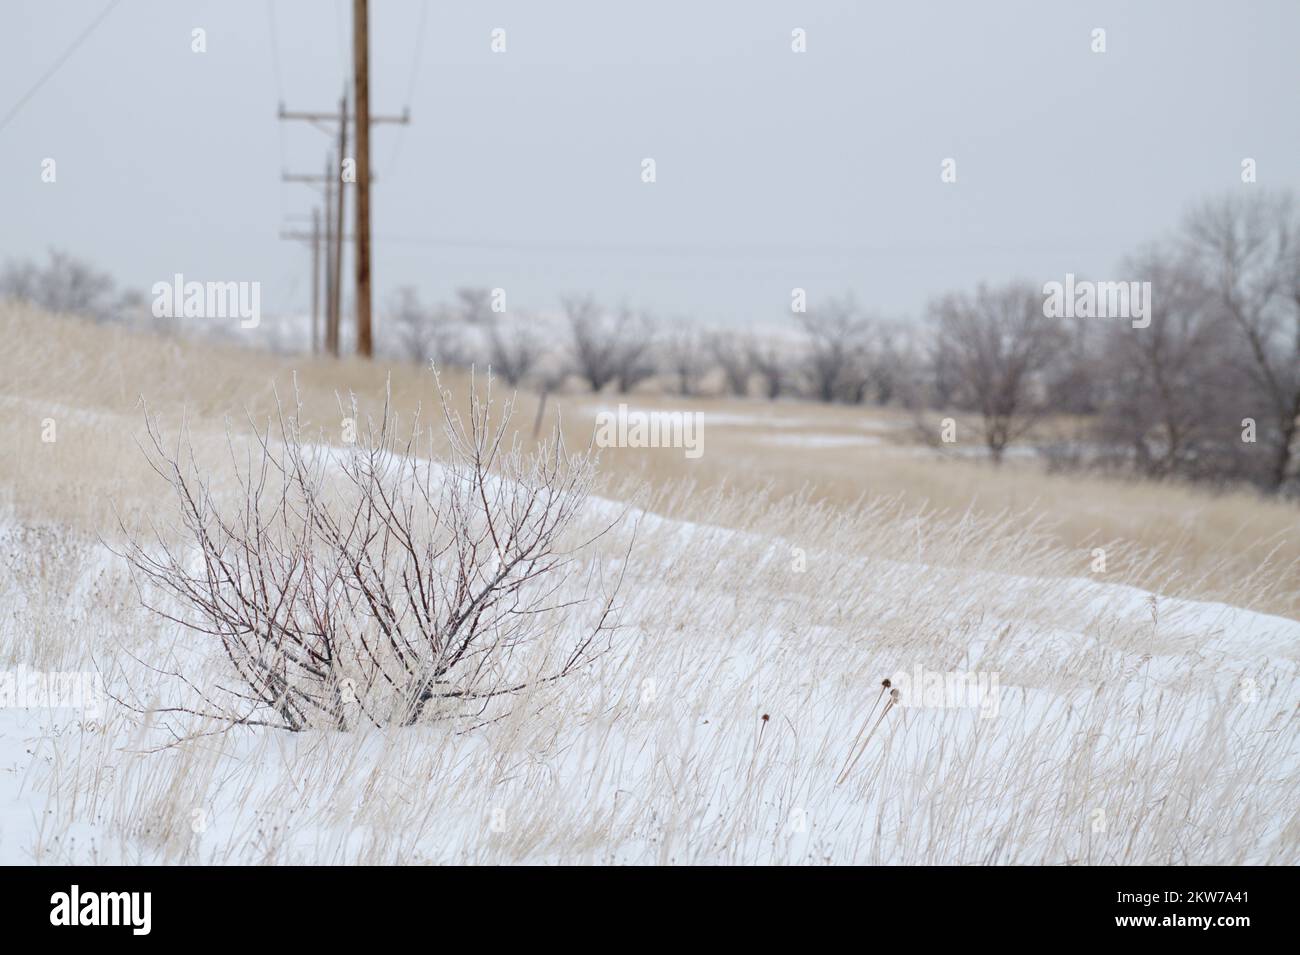 A small bush mid-winter in North Dakota. This image captures the efforts all life makes to overcome and adapt to adversity. Stock Photo